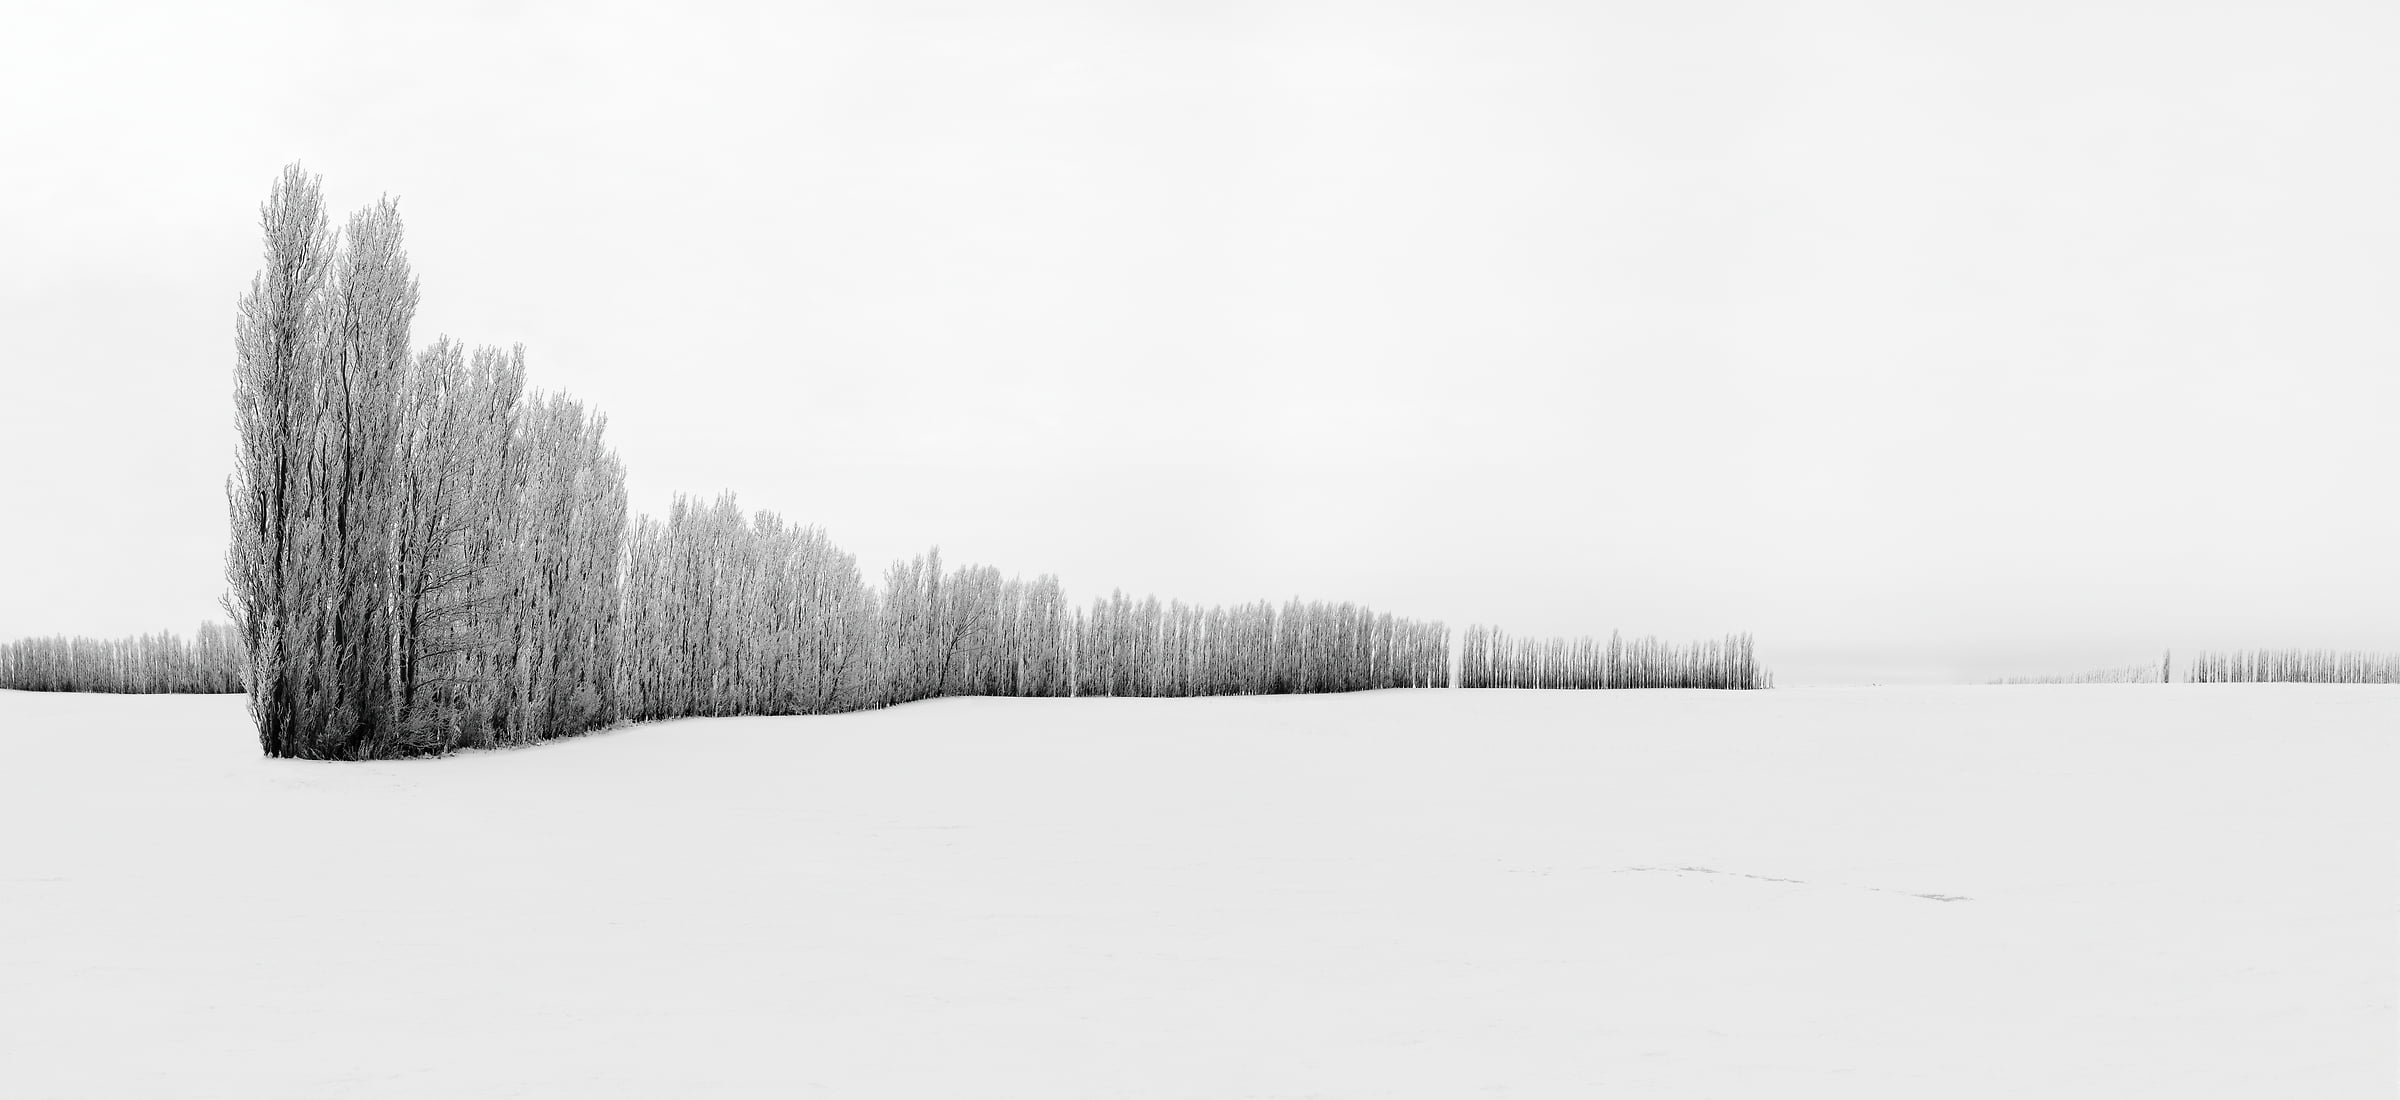 1,337 megapixels! A very high resolution, large-format VAST photo print of an artistic winter scene; landscape photograph created by Scott Dimond in Wheatland County, Alberta, Canada